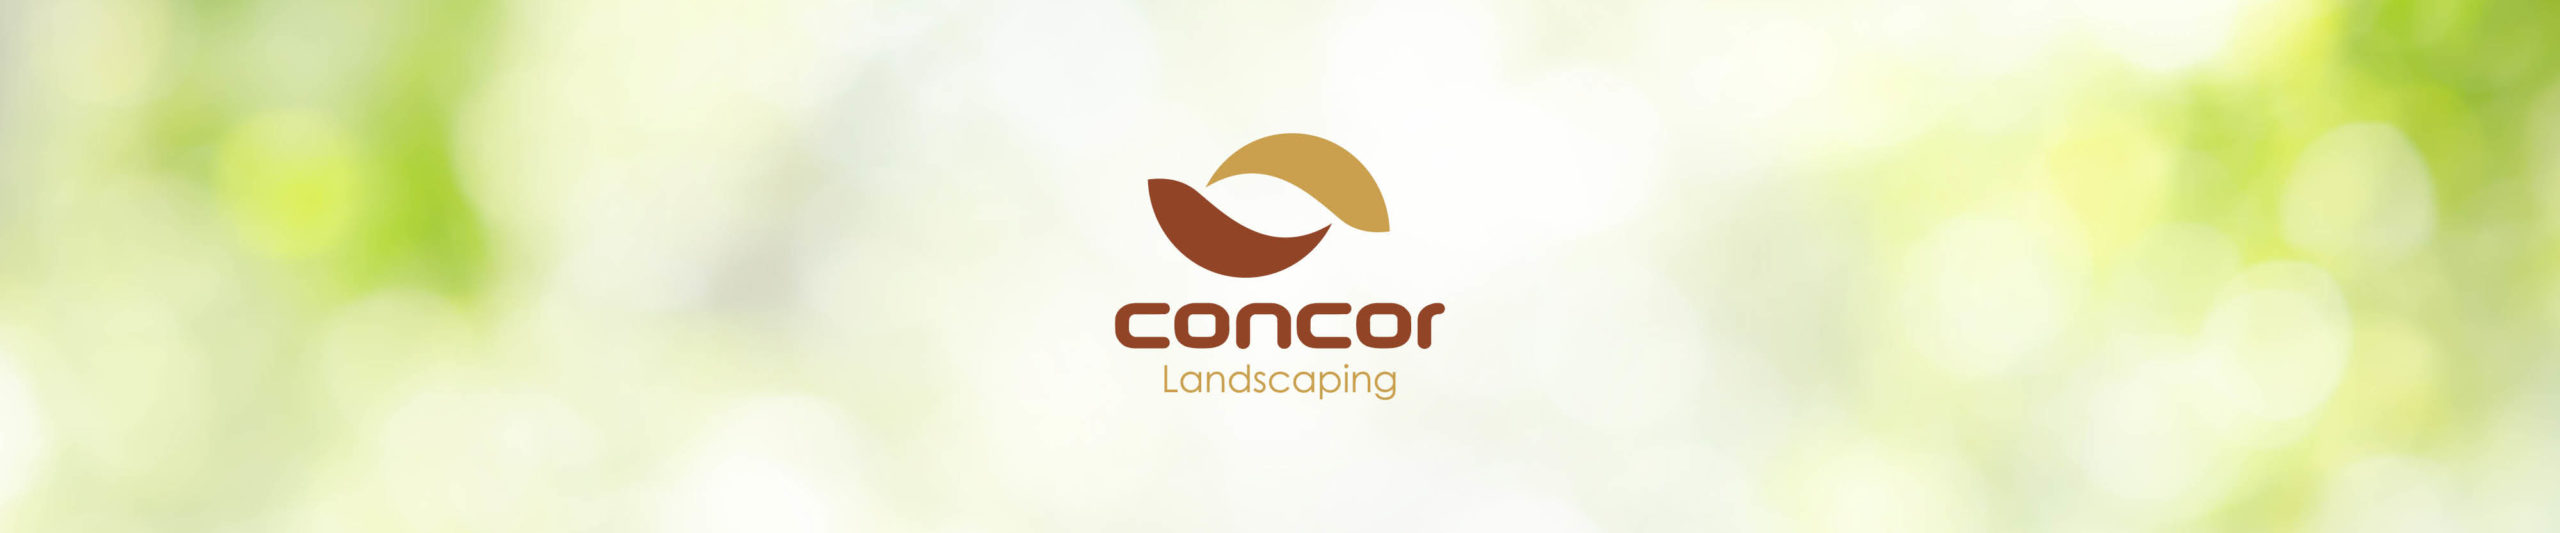 Concor Landscaping Contact Banner